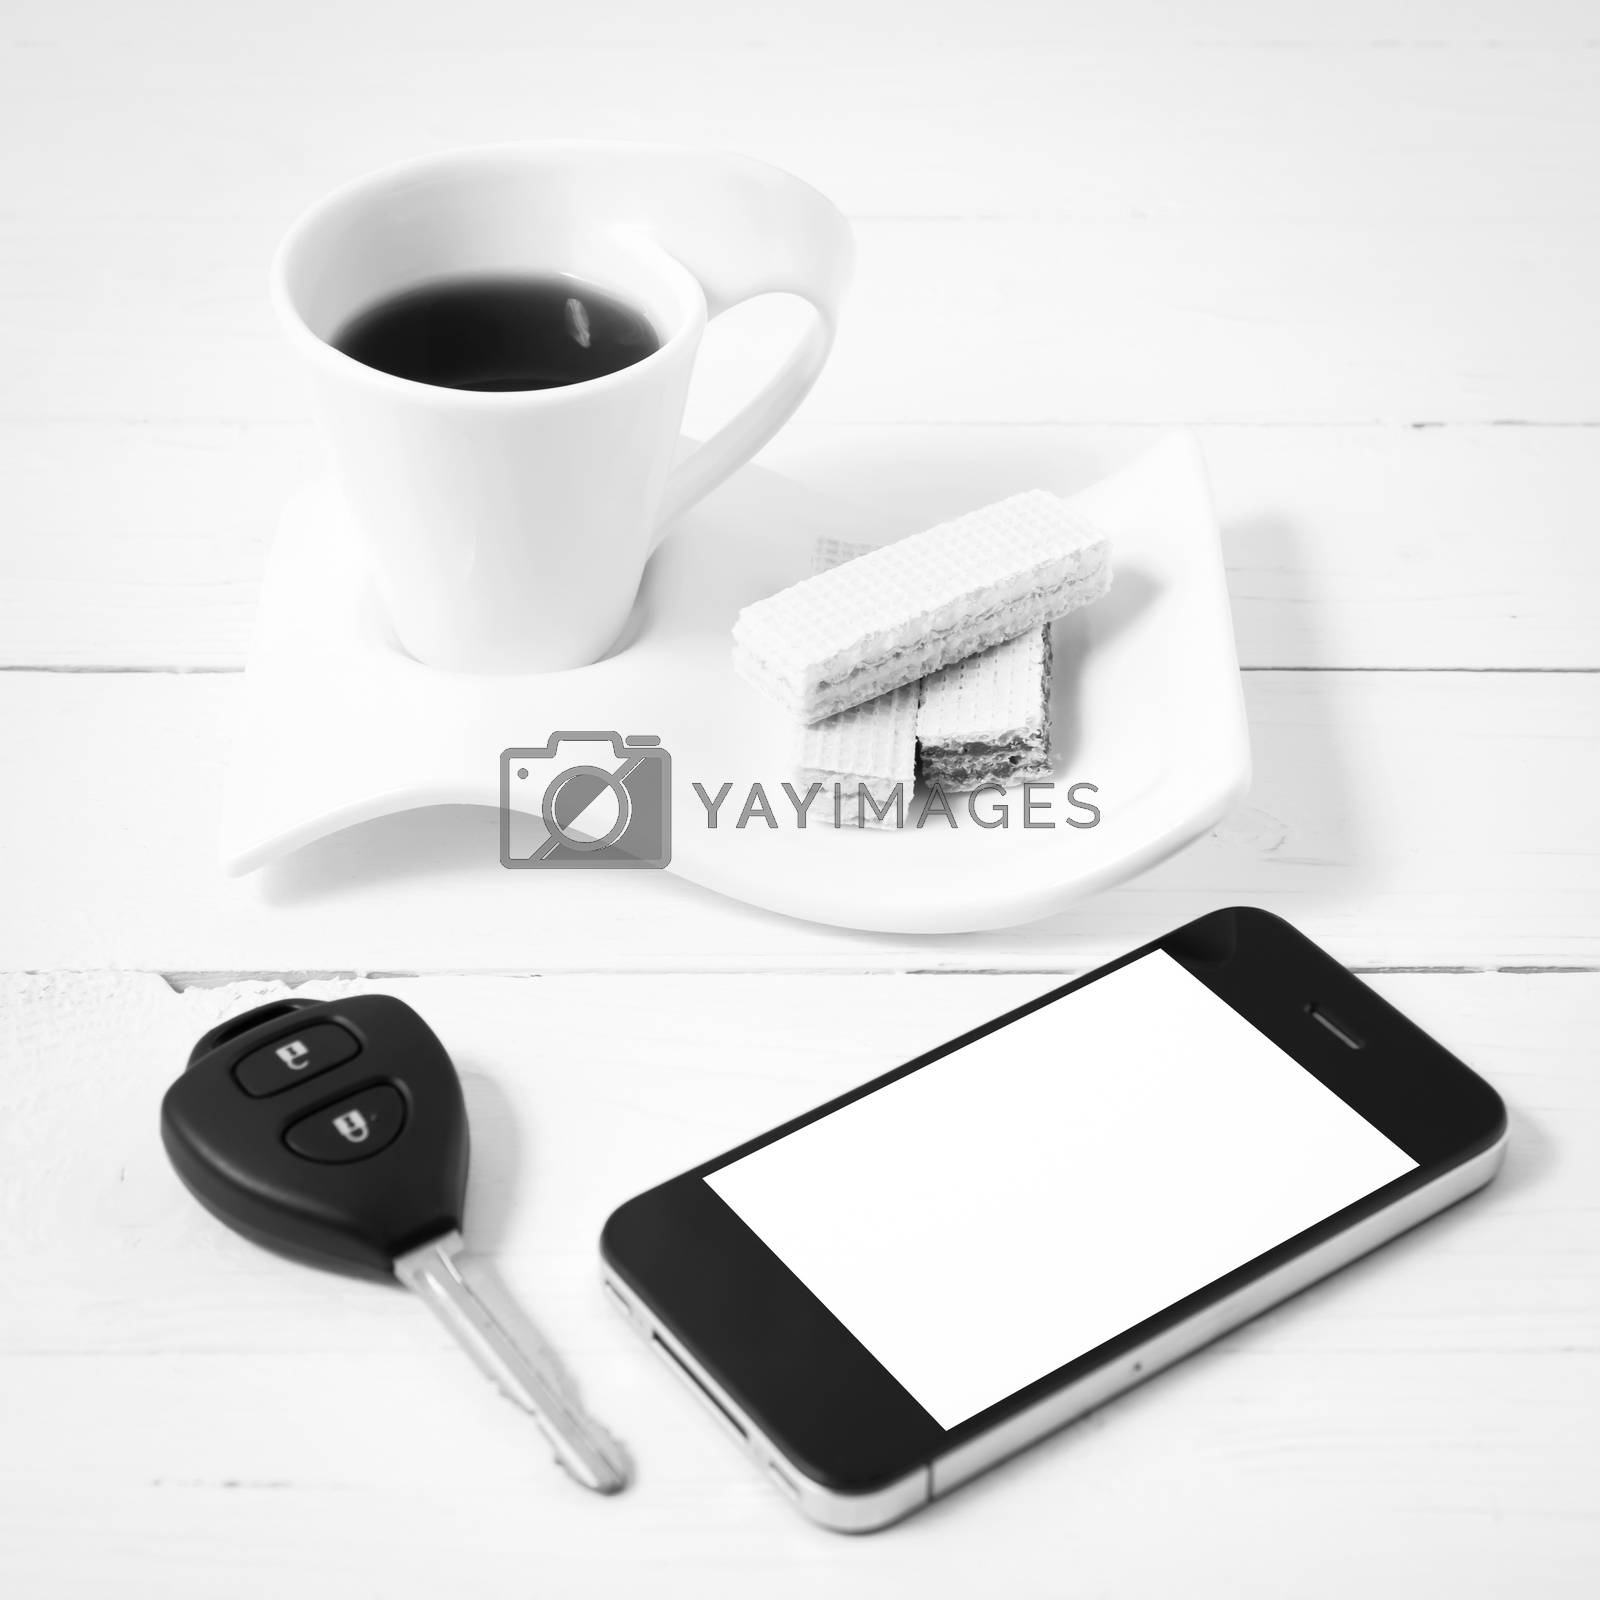 Royalty free image of coffee cup with wafer,phone,car key black and white color by ammza12